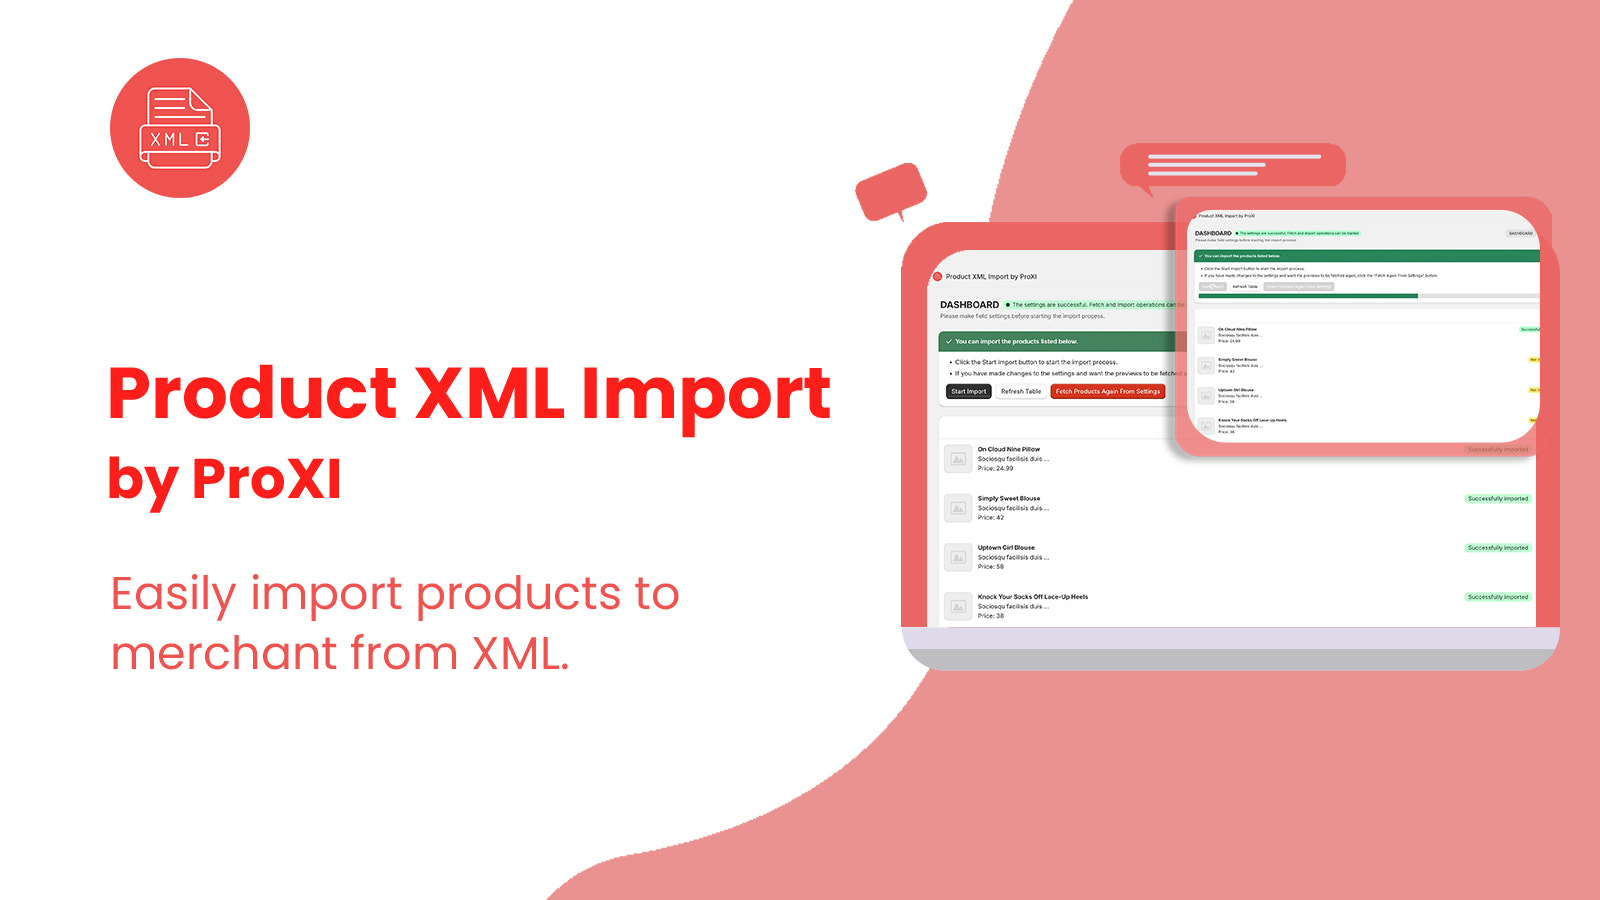 Product XML Import by ProXI: Bulk product import from xml file 